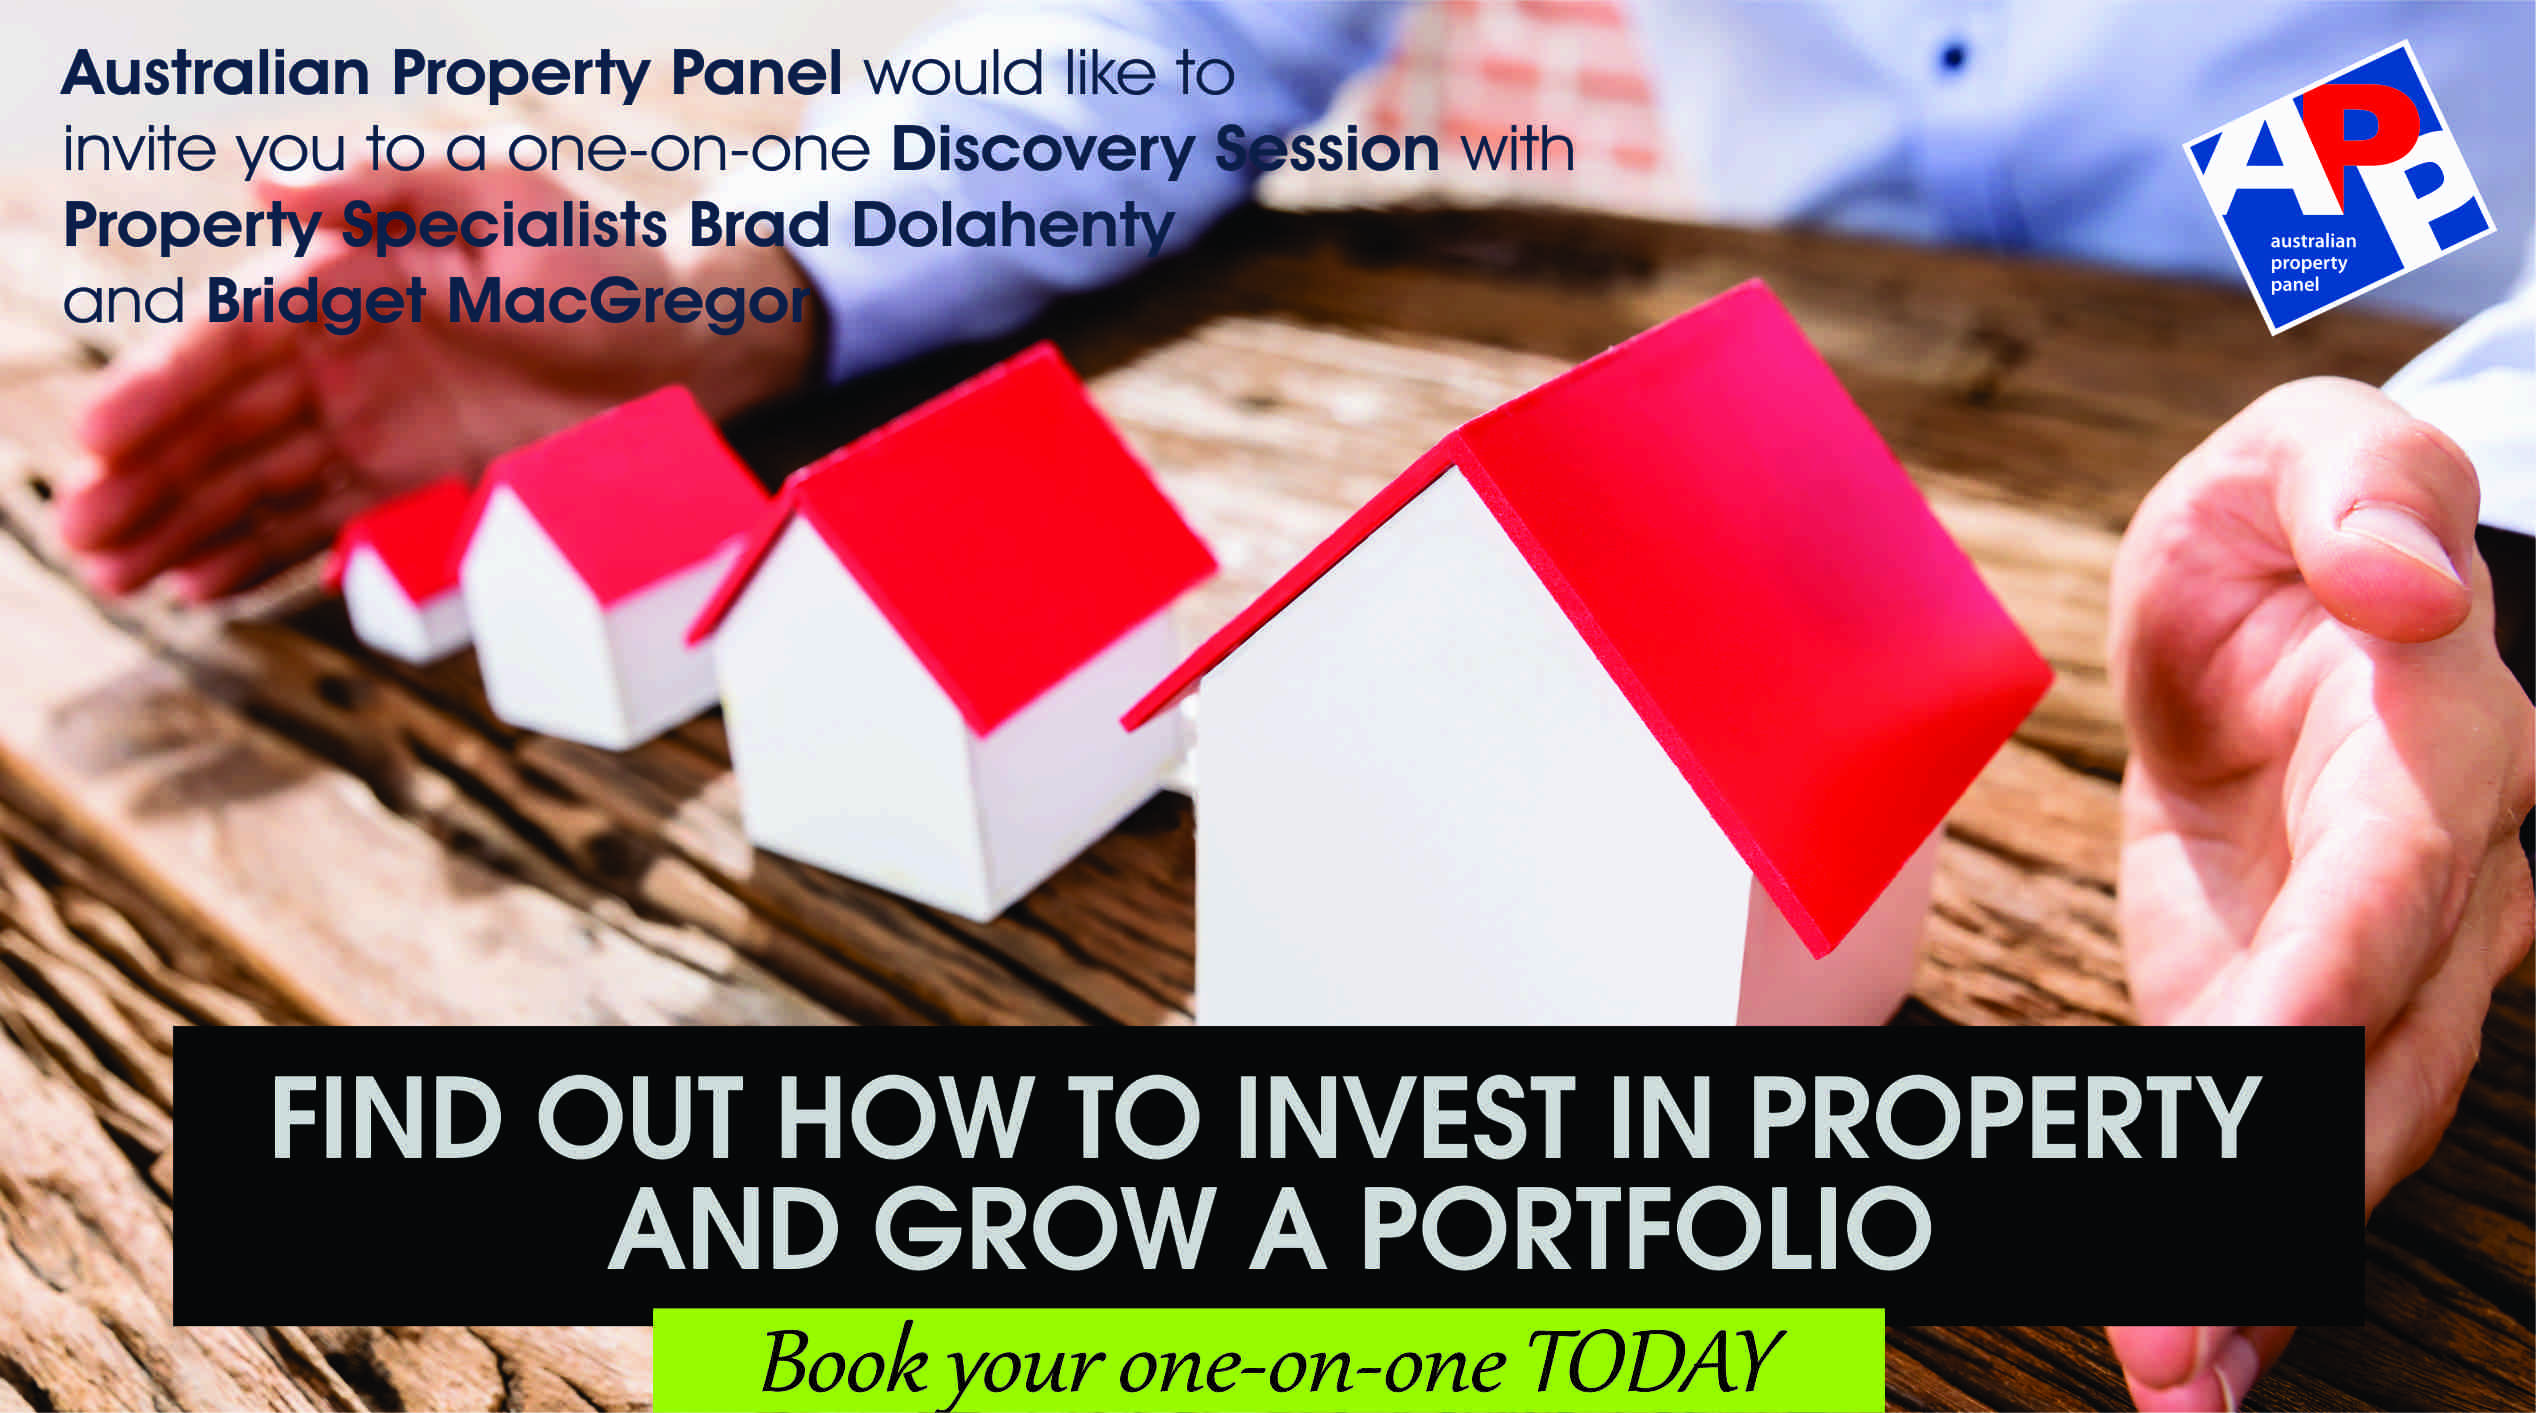 How to invest in property and grow a portfolio